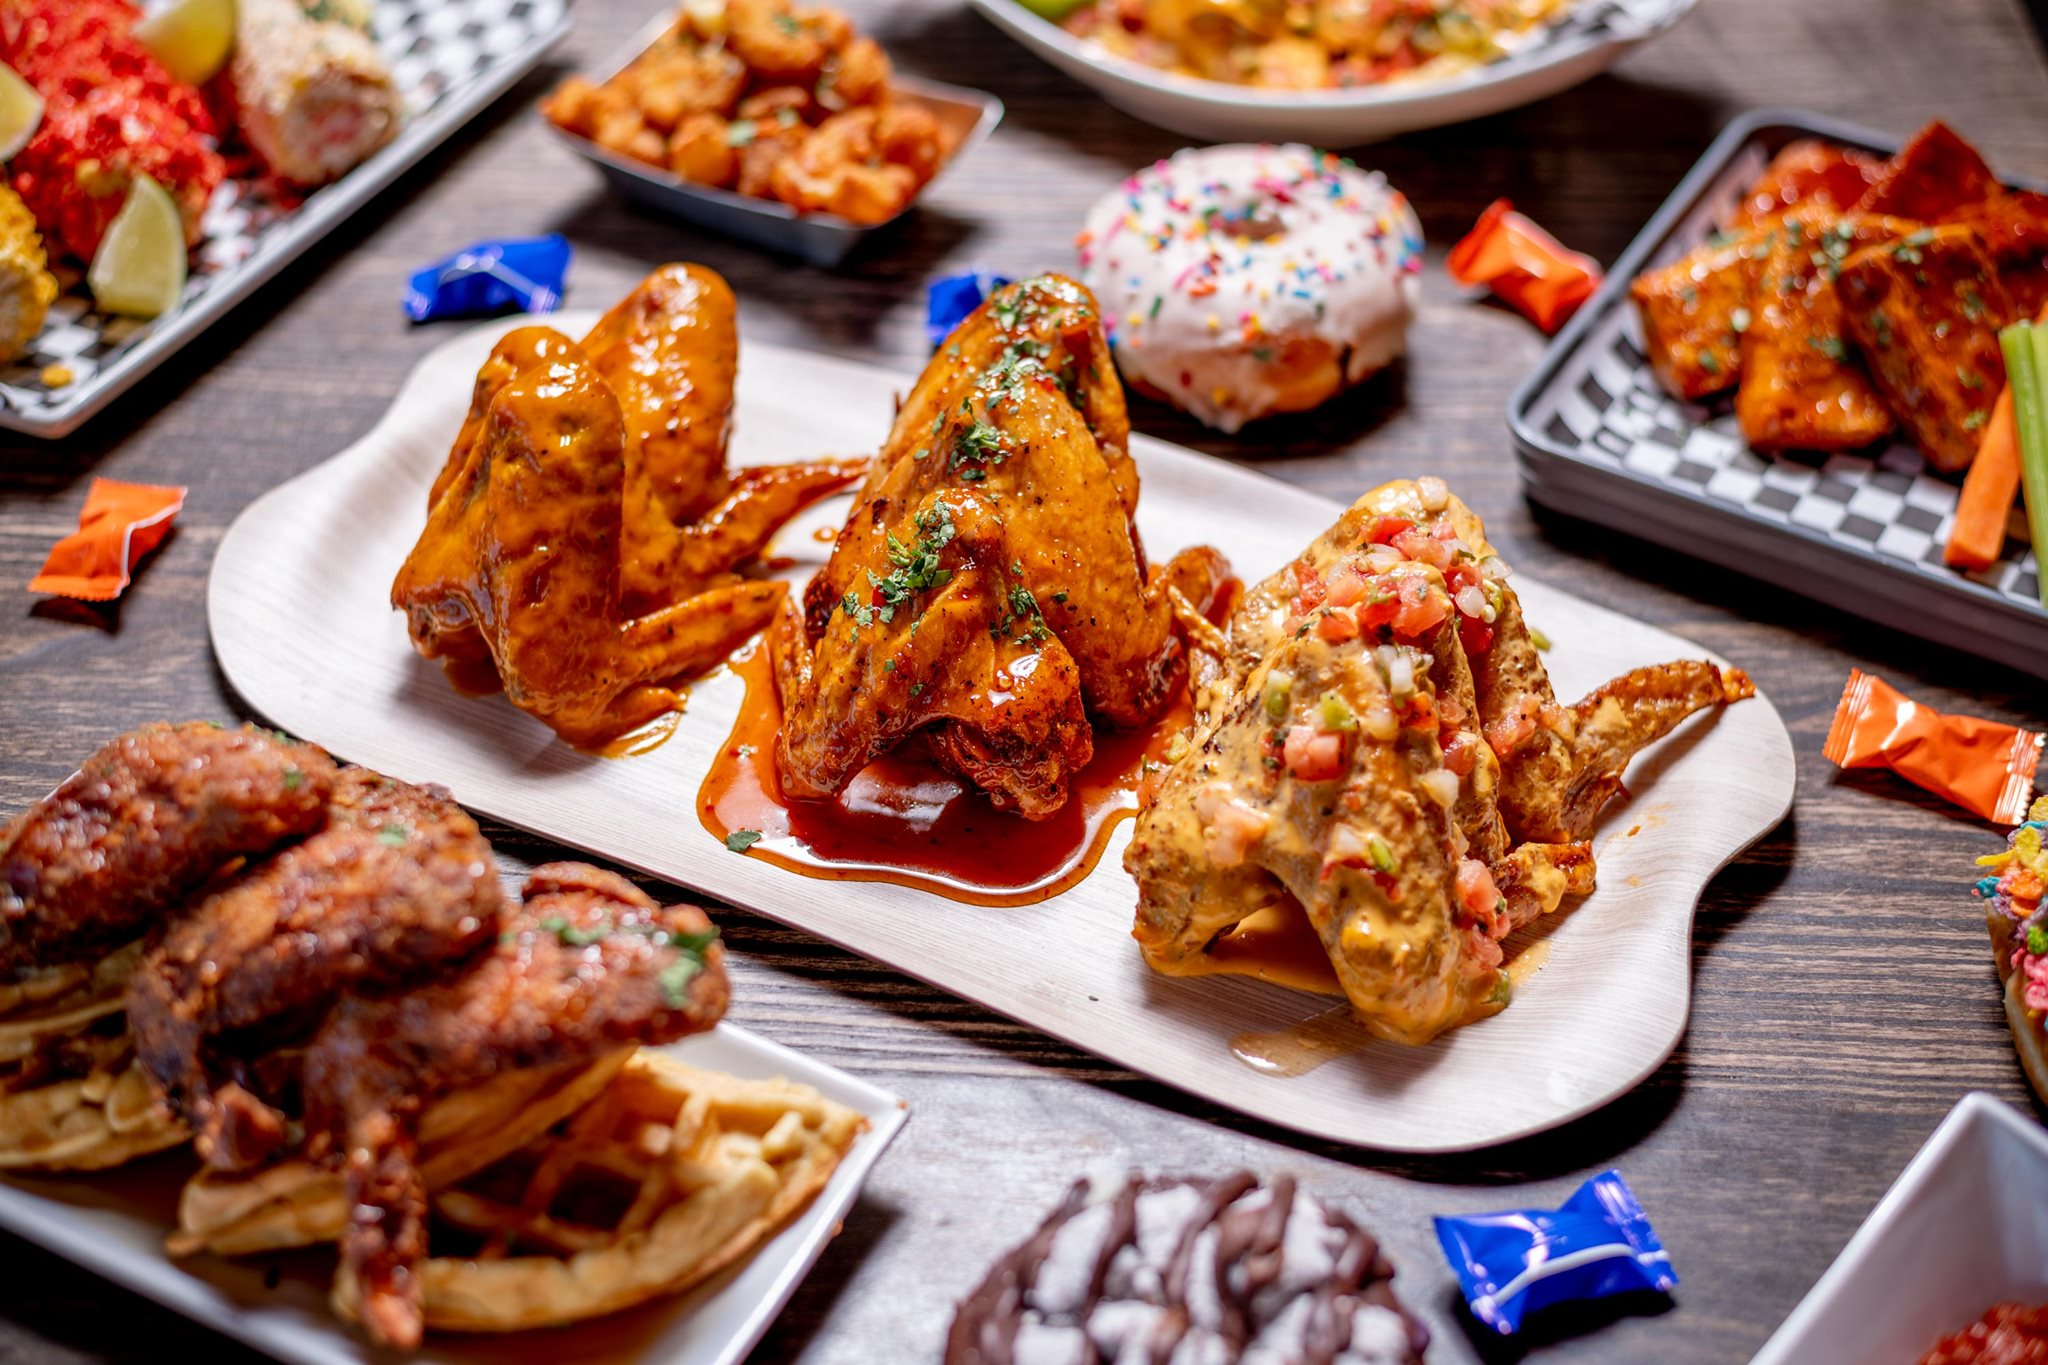 Several containers are overflowing with wings piled up and covered with different sauces. A doughnut sits in the middle of the table, a nod to the location inside Glam Doll Donuts Northeast location where B.A.D. Wingz will open